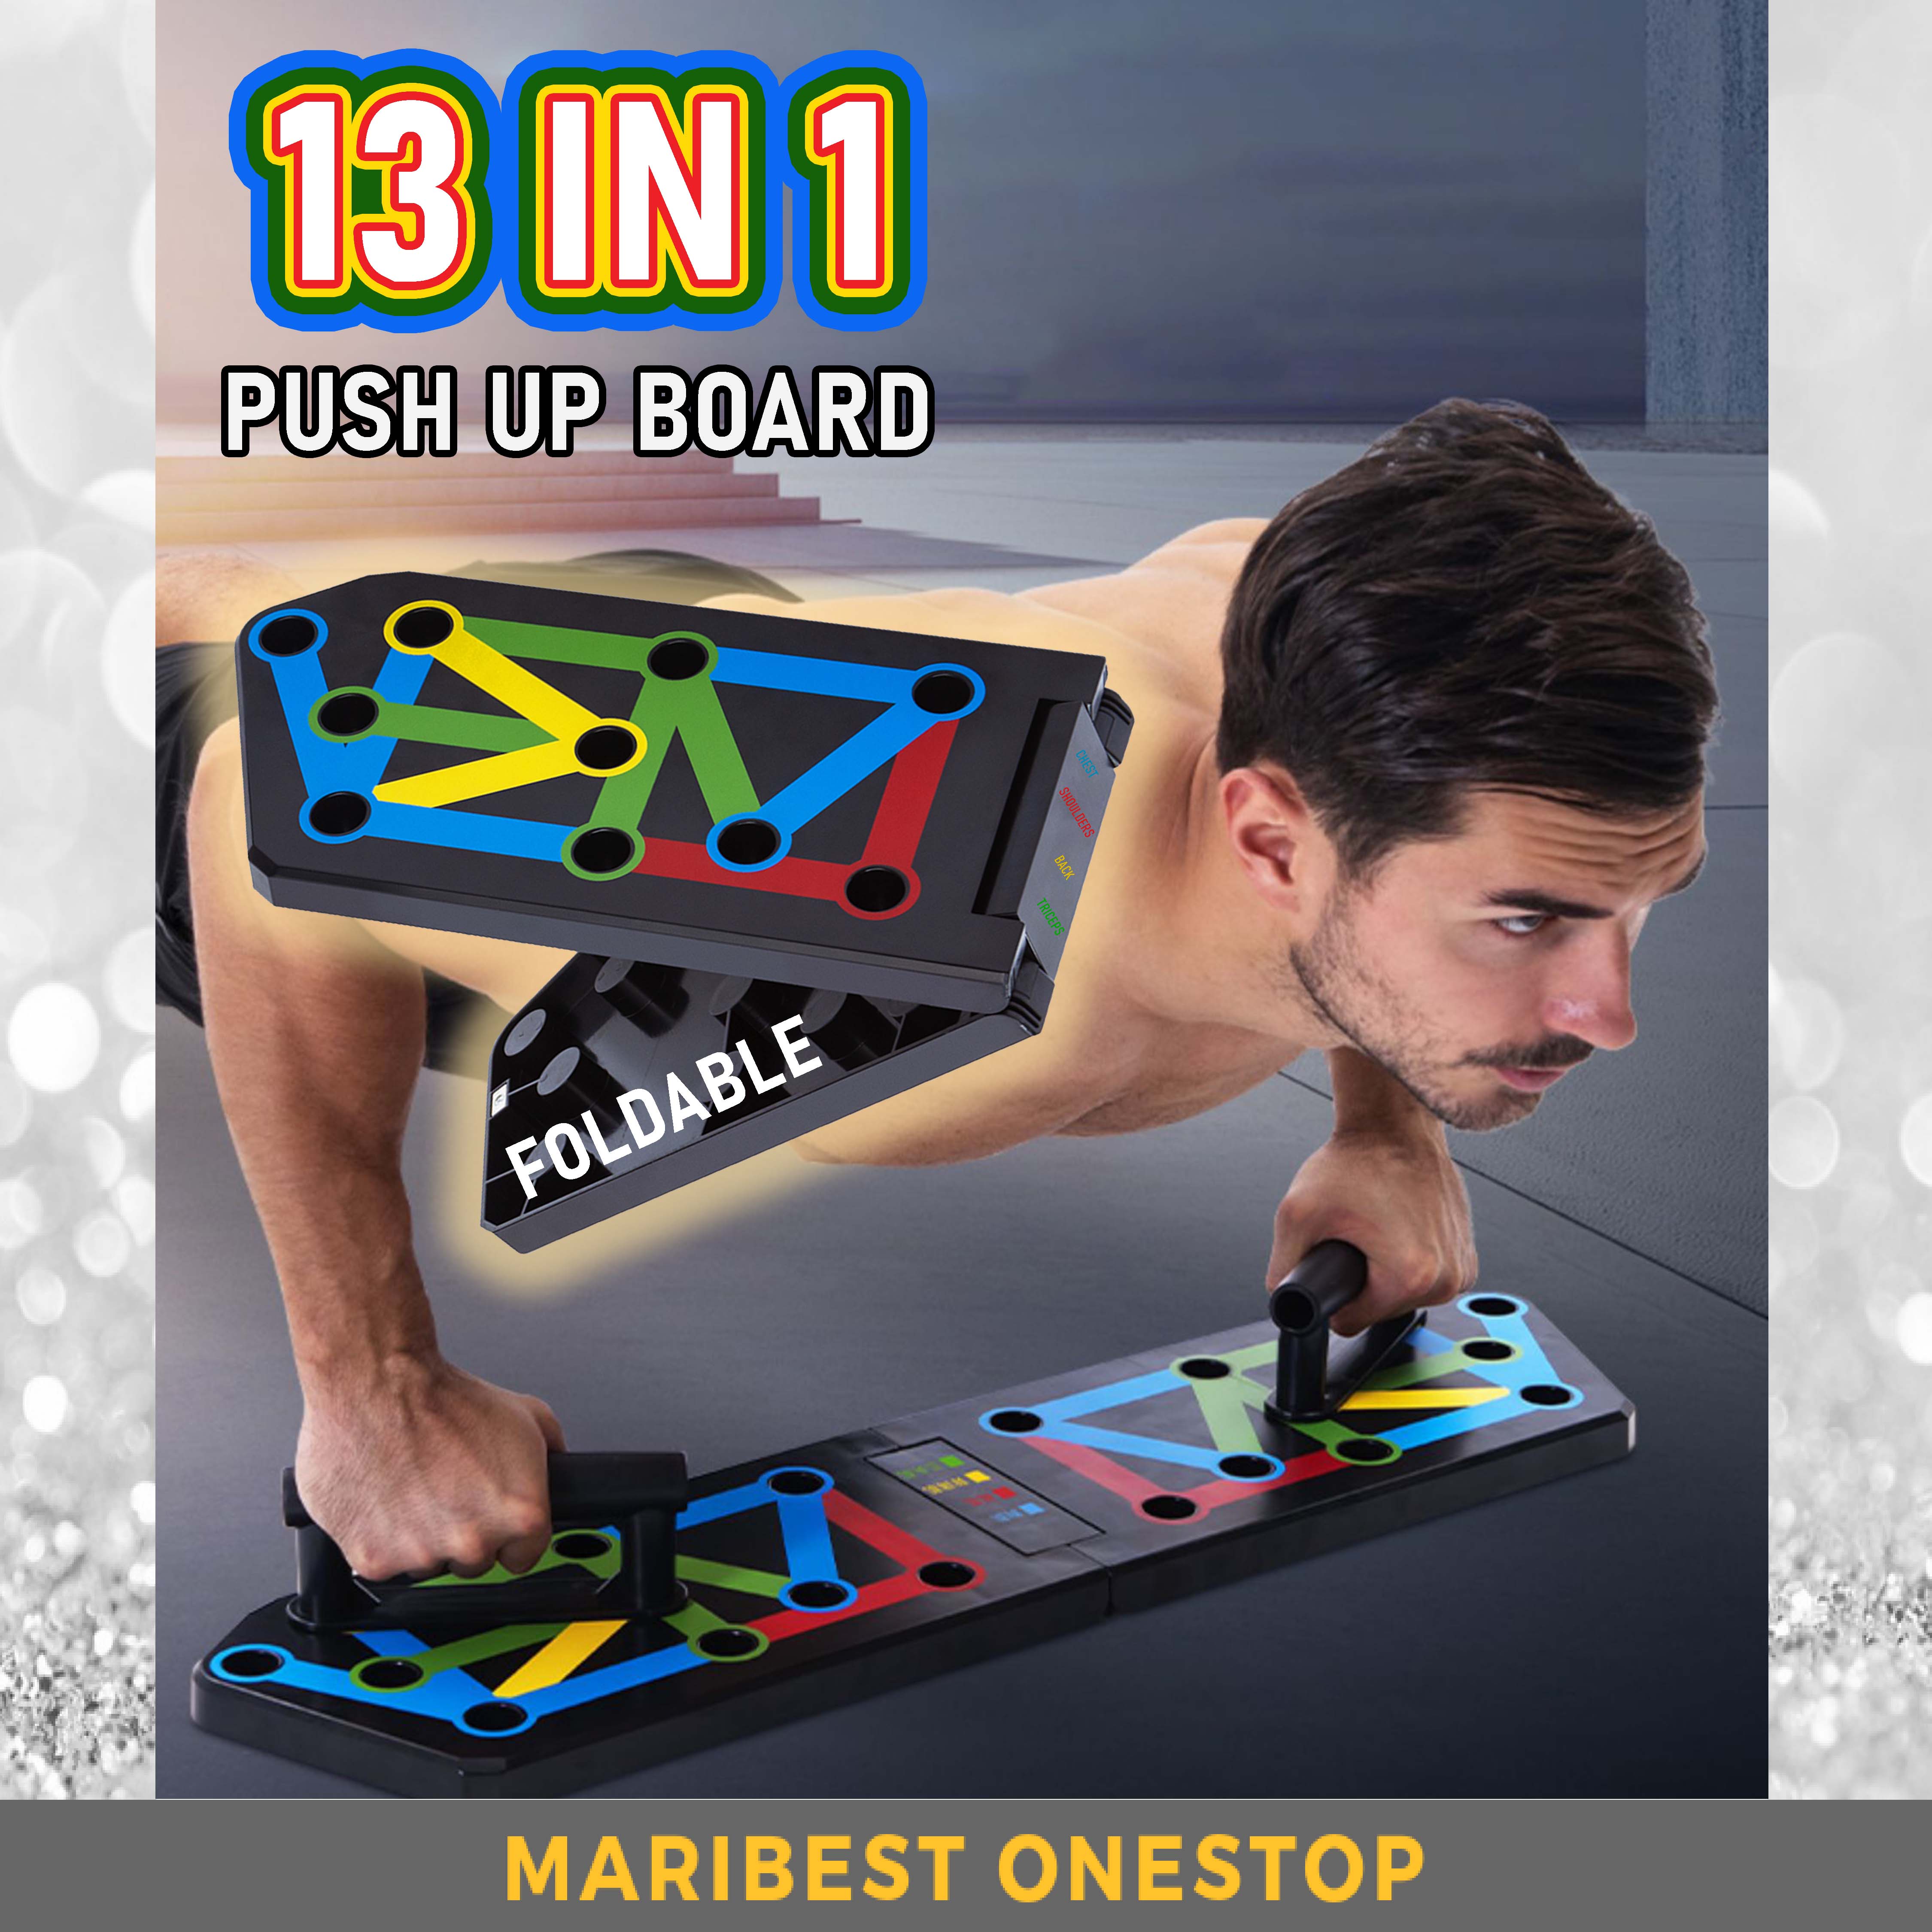 13 IN 1 PUSH UP RACK FOLDABLE BOARD SYSTEM MEN WOMEN EXERCISE WORKOUT COMPACTED DESIGN PUSH UP BOARD